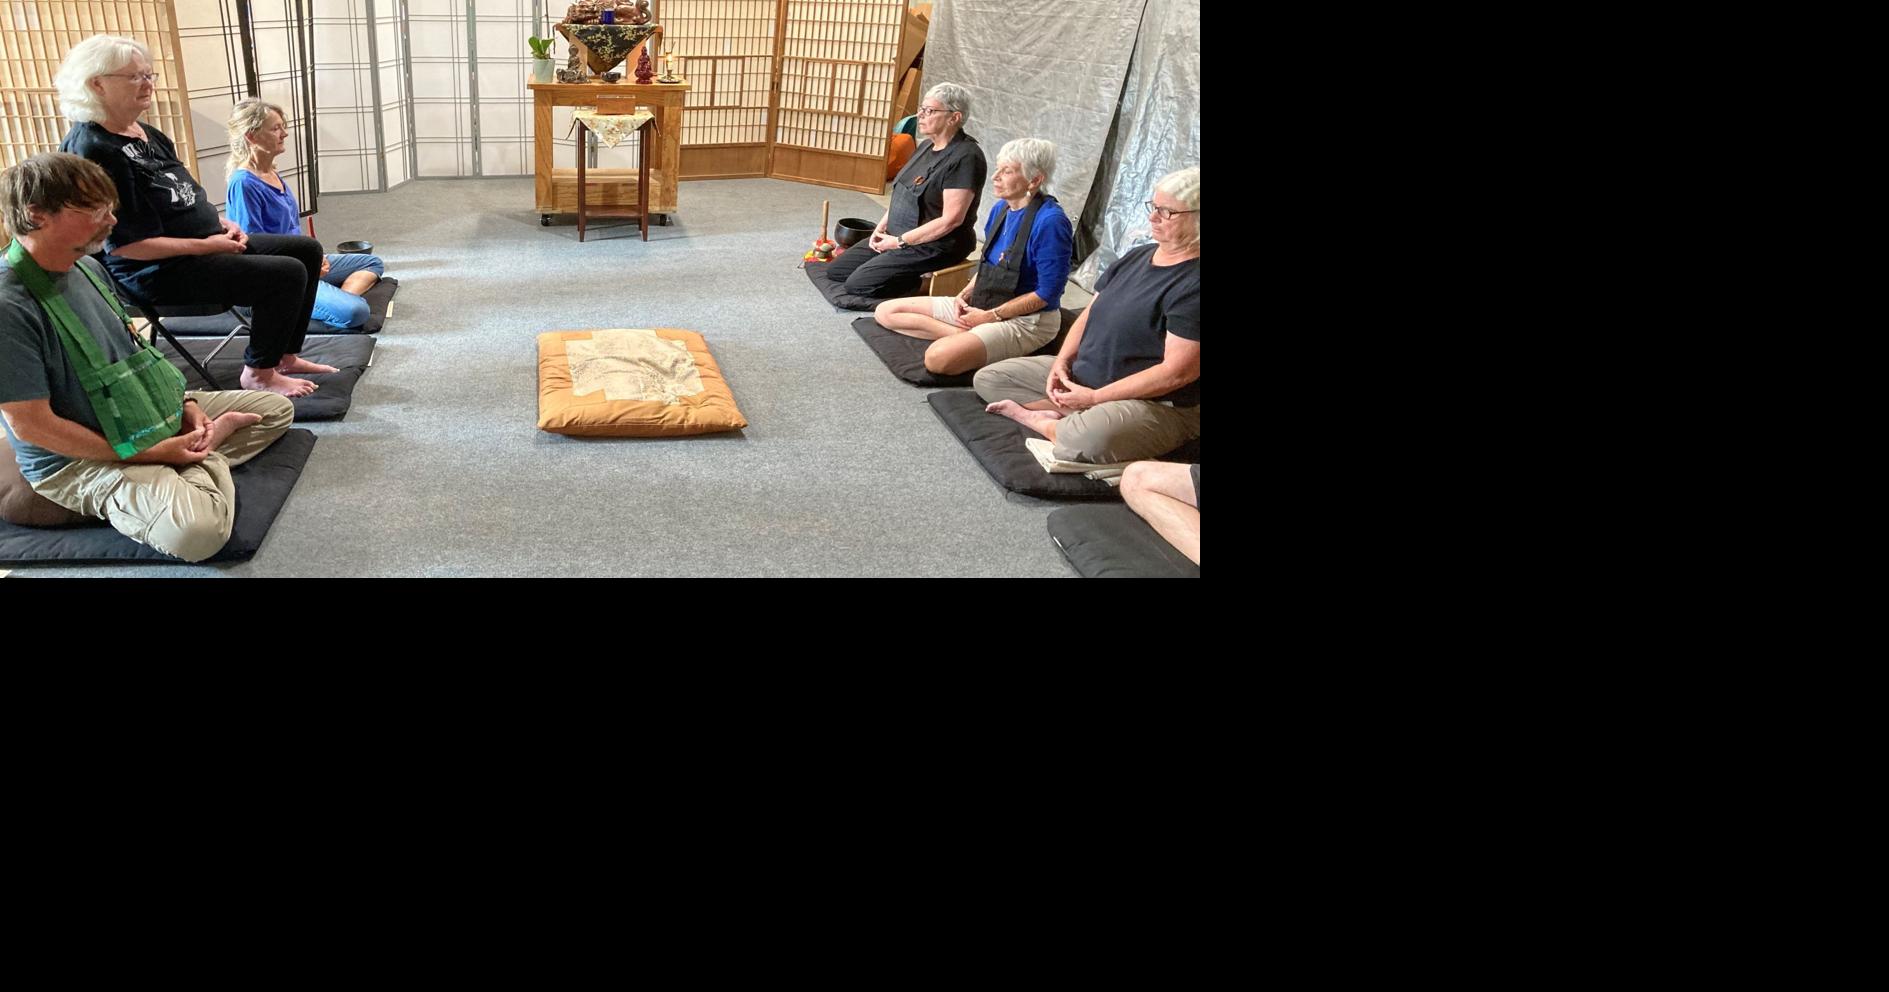 Zen Buddhist group to hold five-day retreat in Black Hills